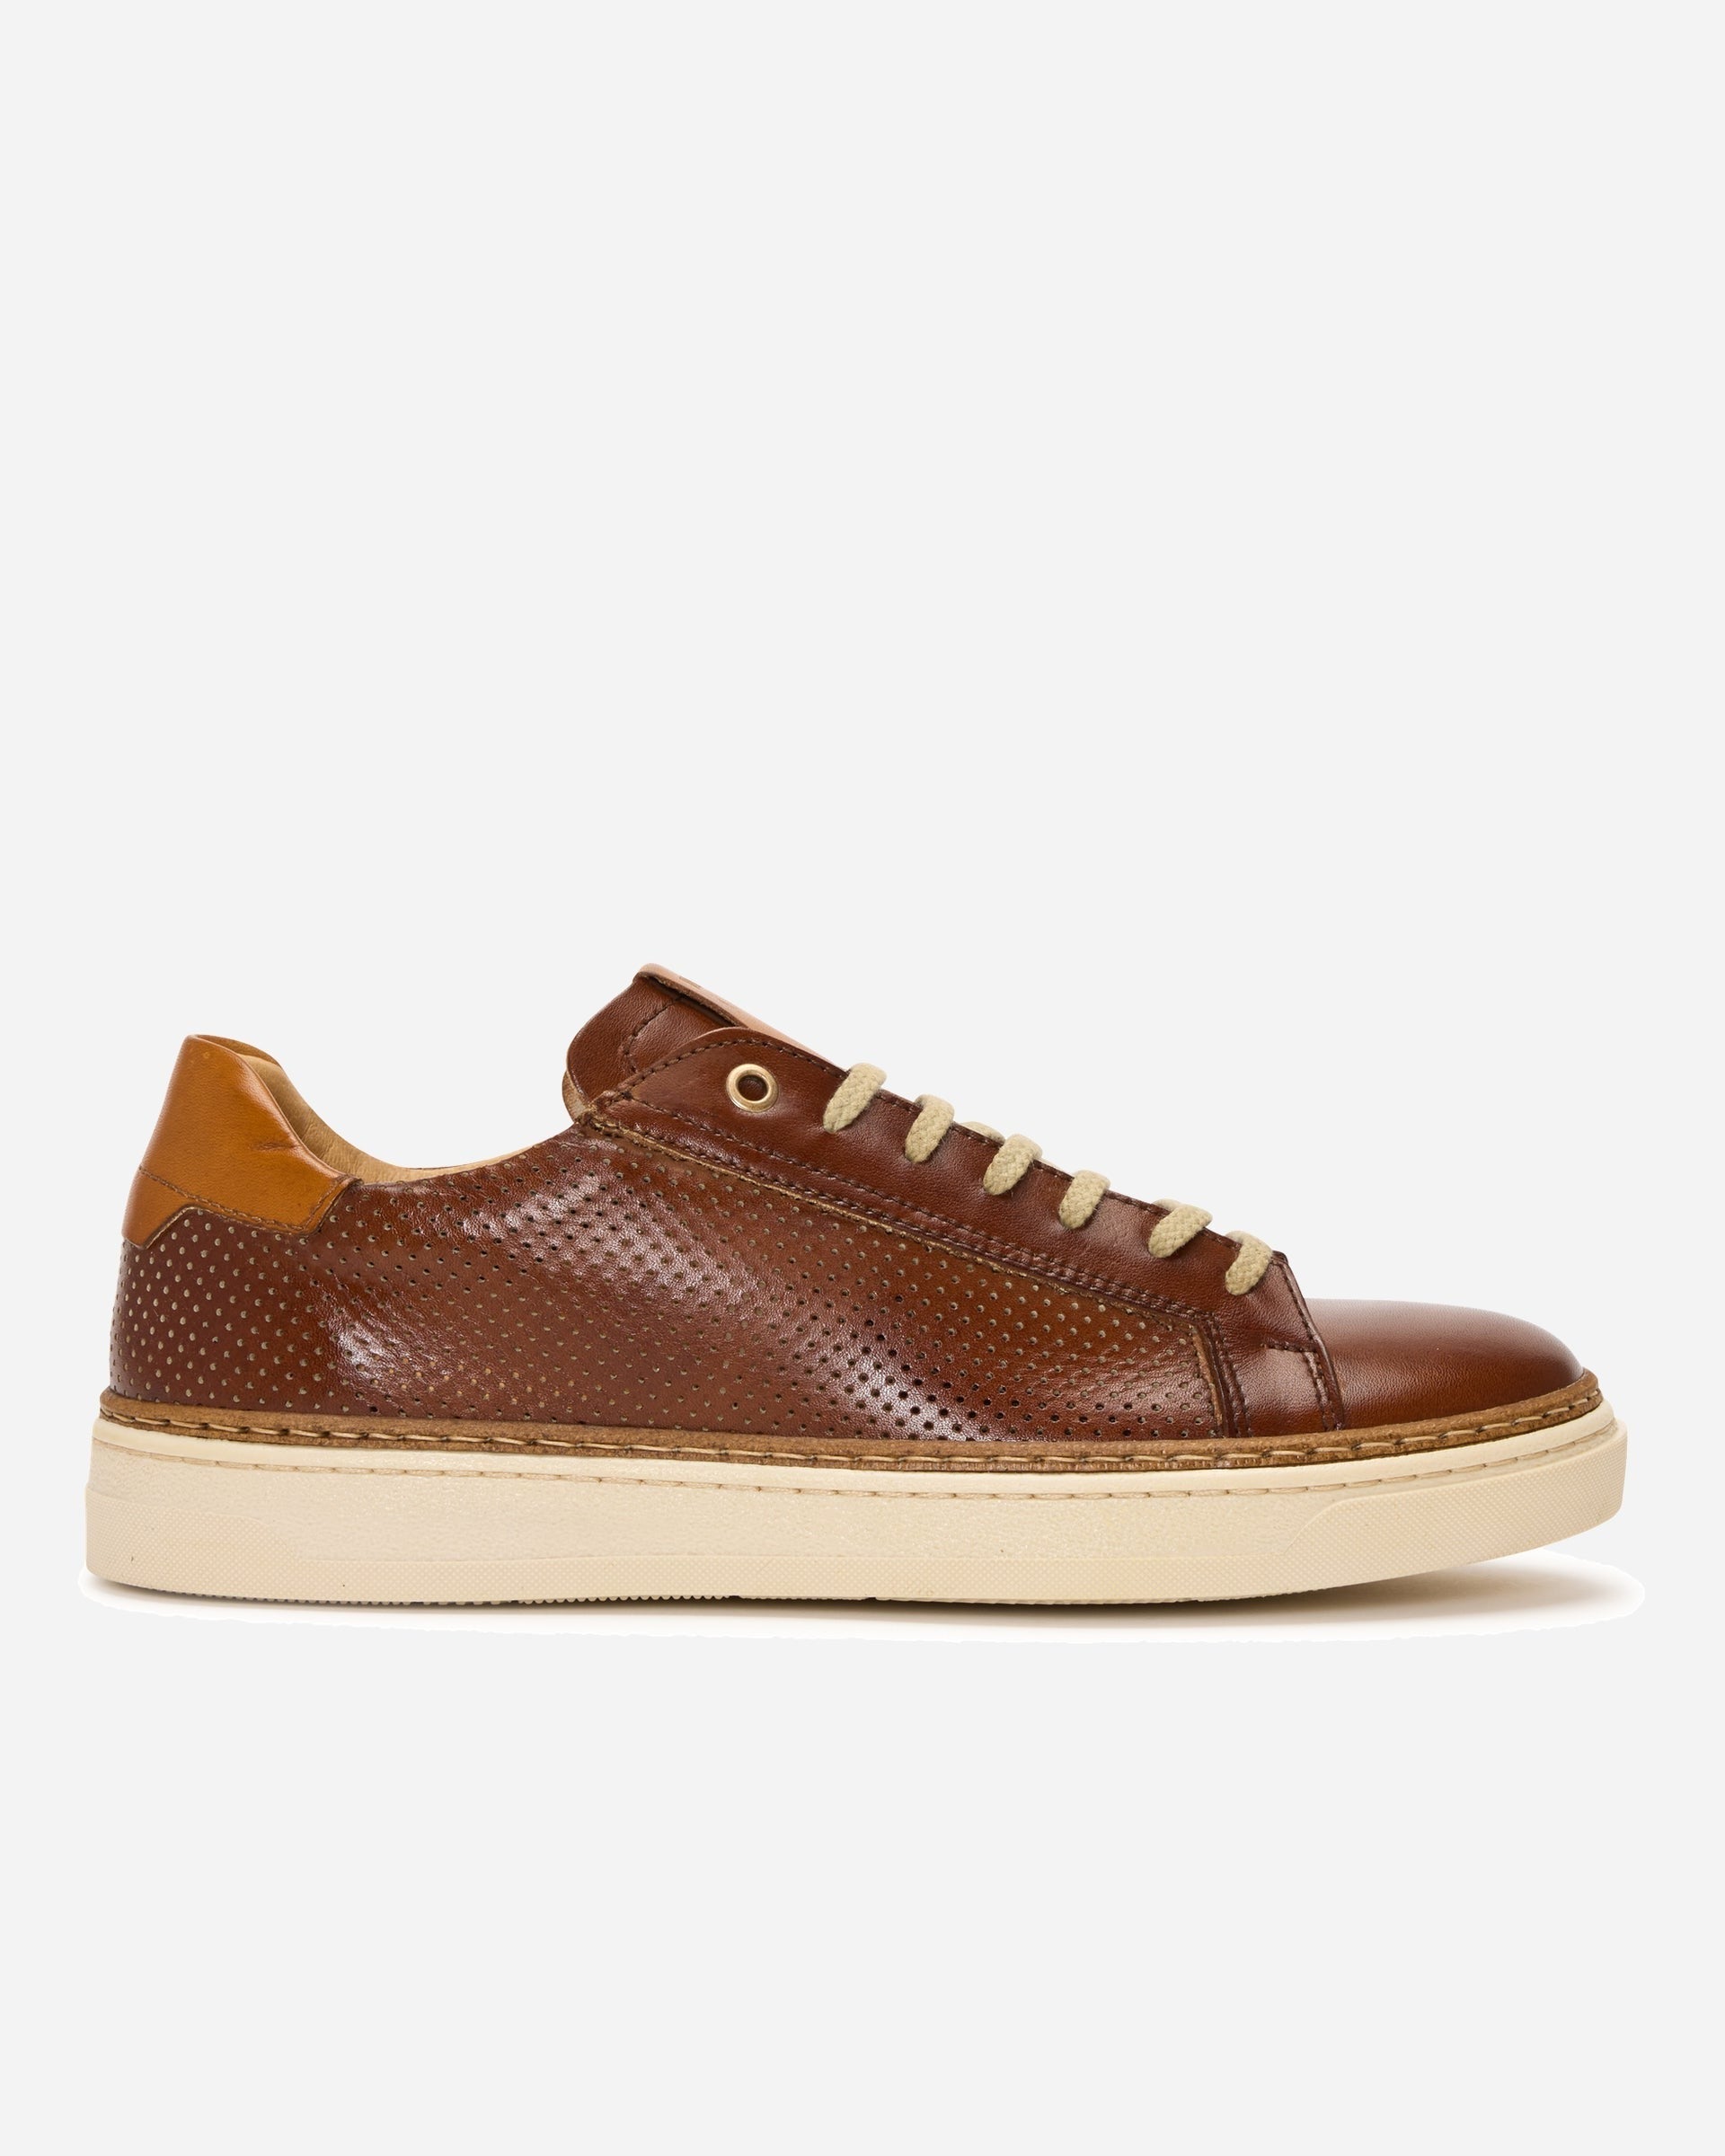 Crust Cuoio Sneaker - Men's Shoes at Menzclub